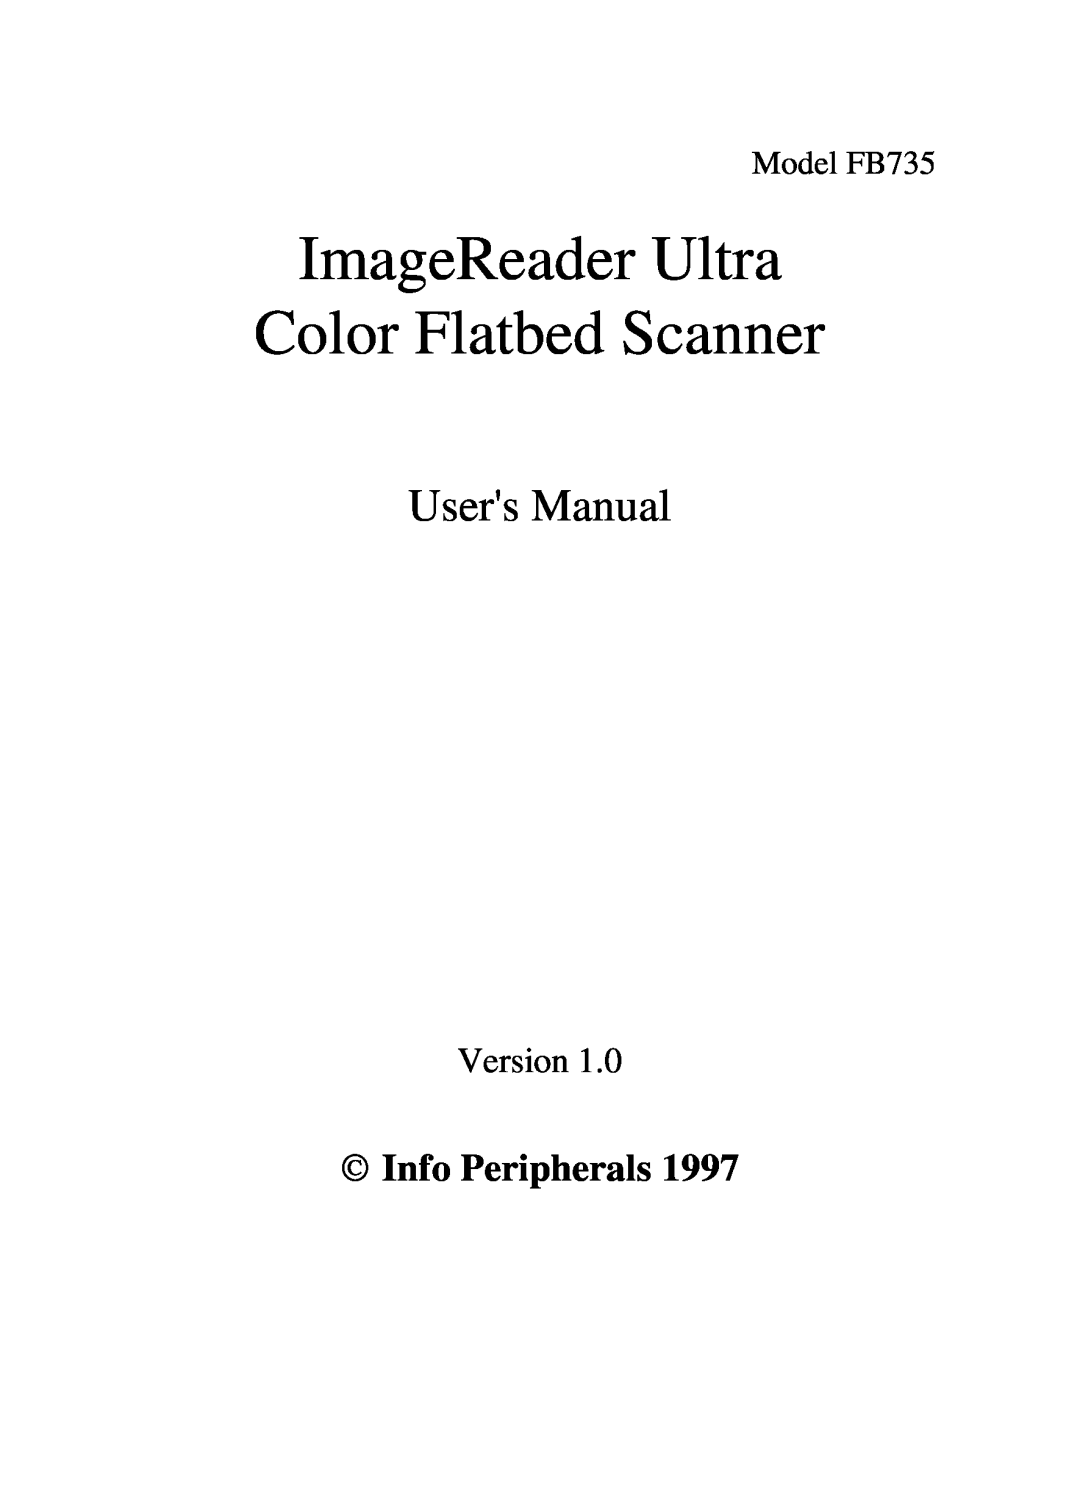 IBM Ricoh FB735 user manual ImageReader Ultra Color Flatbed Scanner, Users Manual, Ó Info Peripherals, Version 